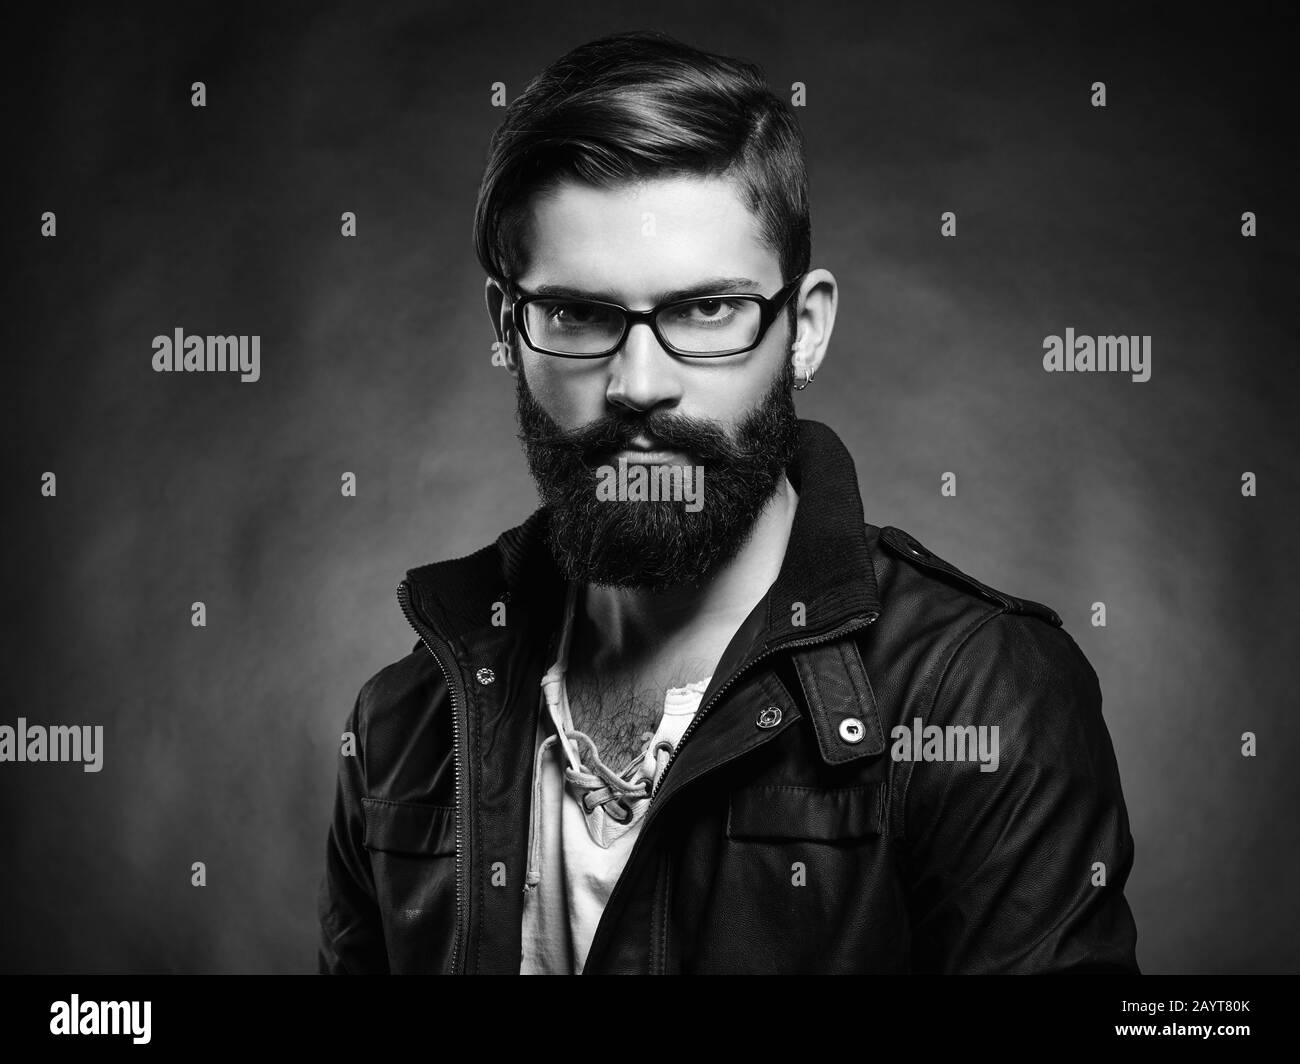 Portrait of handsome man with beard and mustache. Close-up image of serious brutal bearded man on dark background. Man with glasses. Black and white p Stock Photo